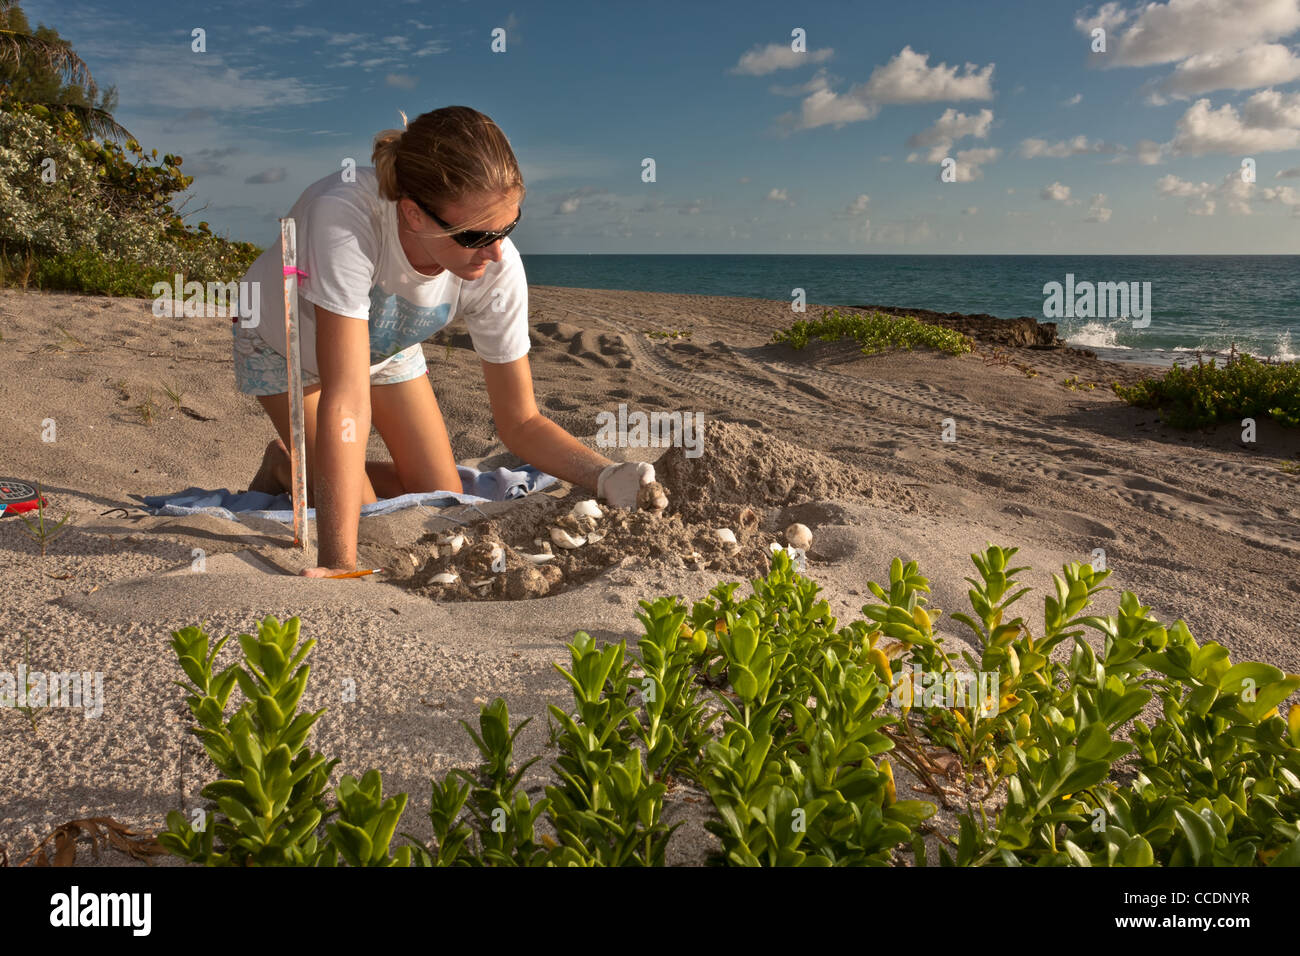 Researcher collecting sea turtle data Stock Photo